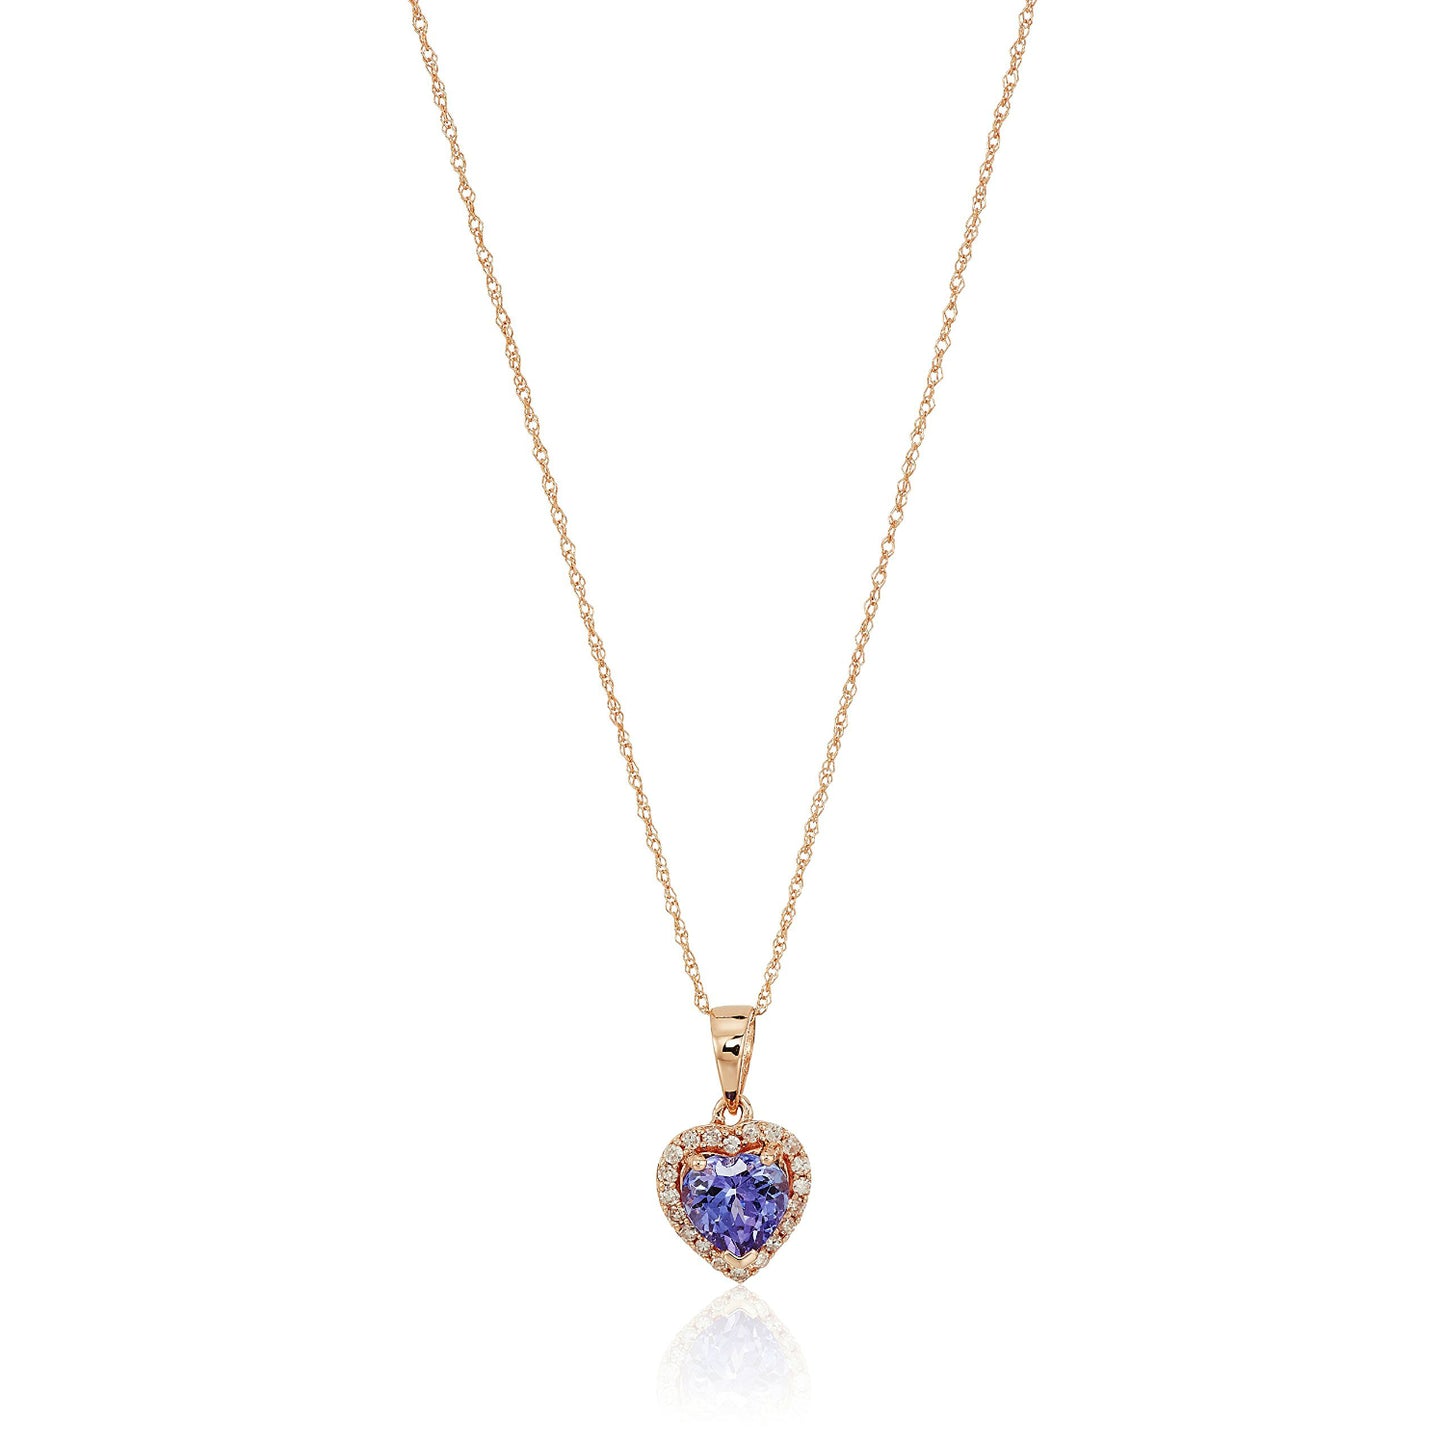 10k Rose Gold Tanzanite Heart and Diamond Pendant Necklace, (1/10 cttw H-I Color, I1-I2 Clarity), 18" - pinctore